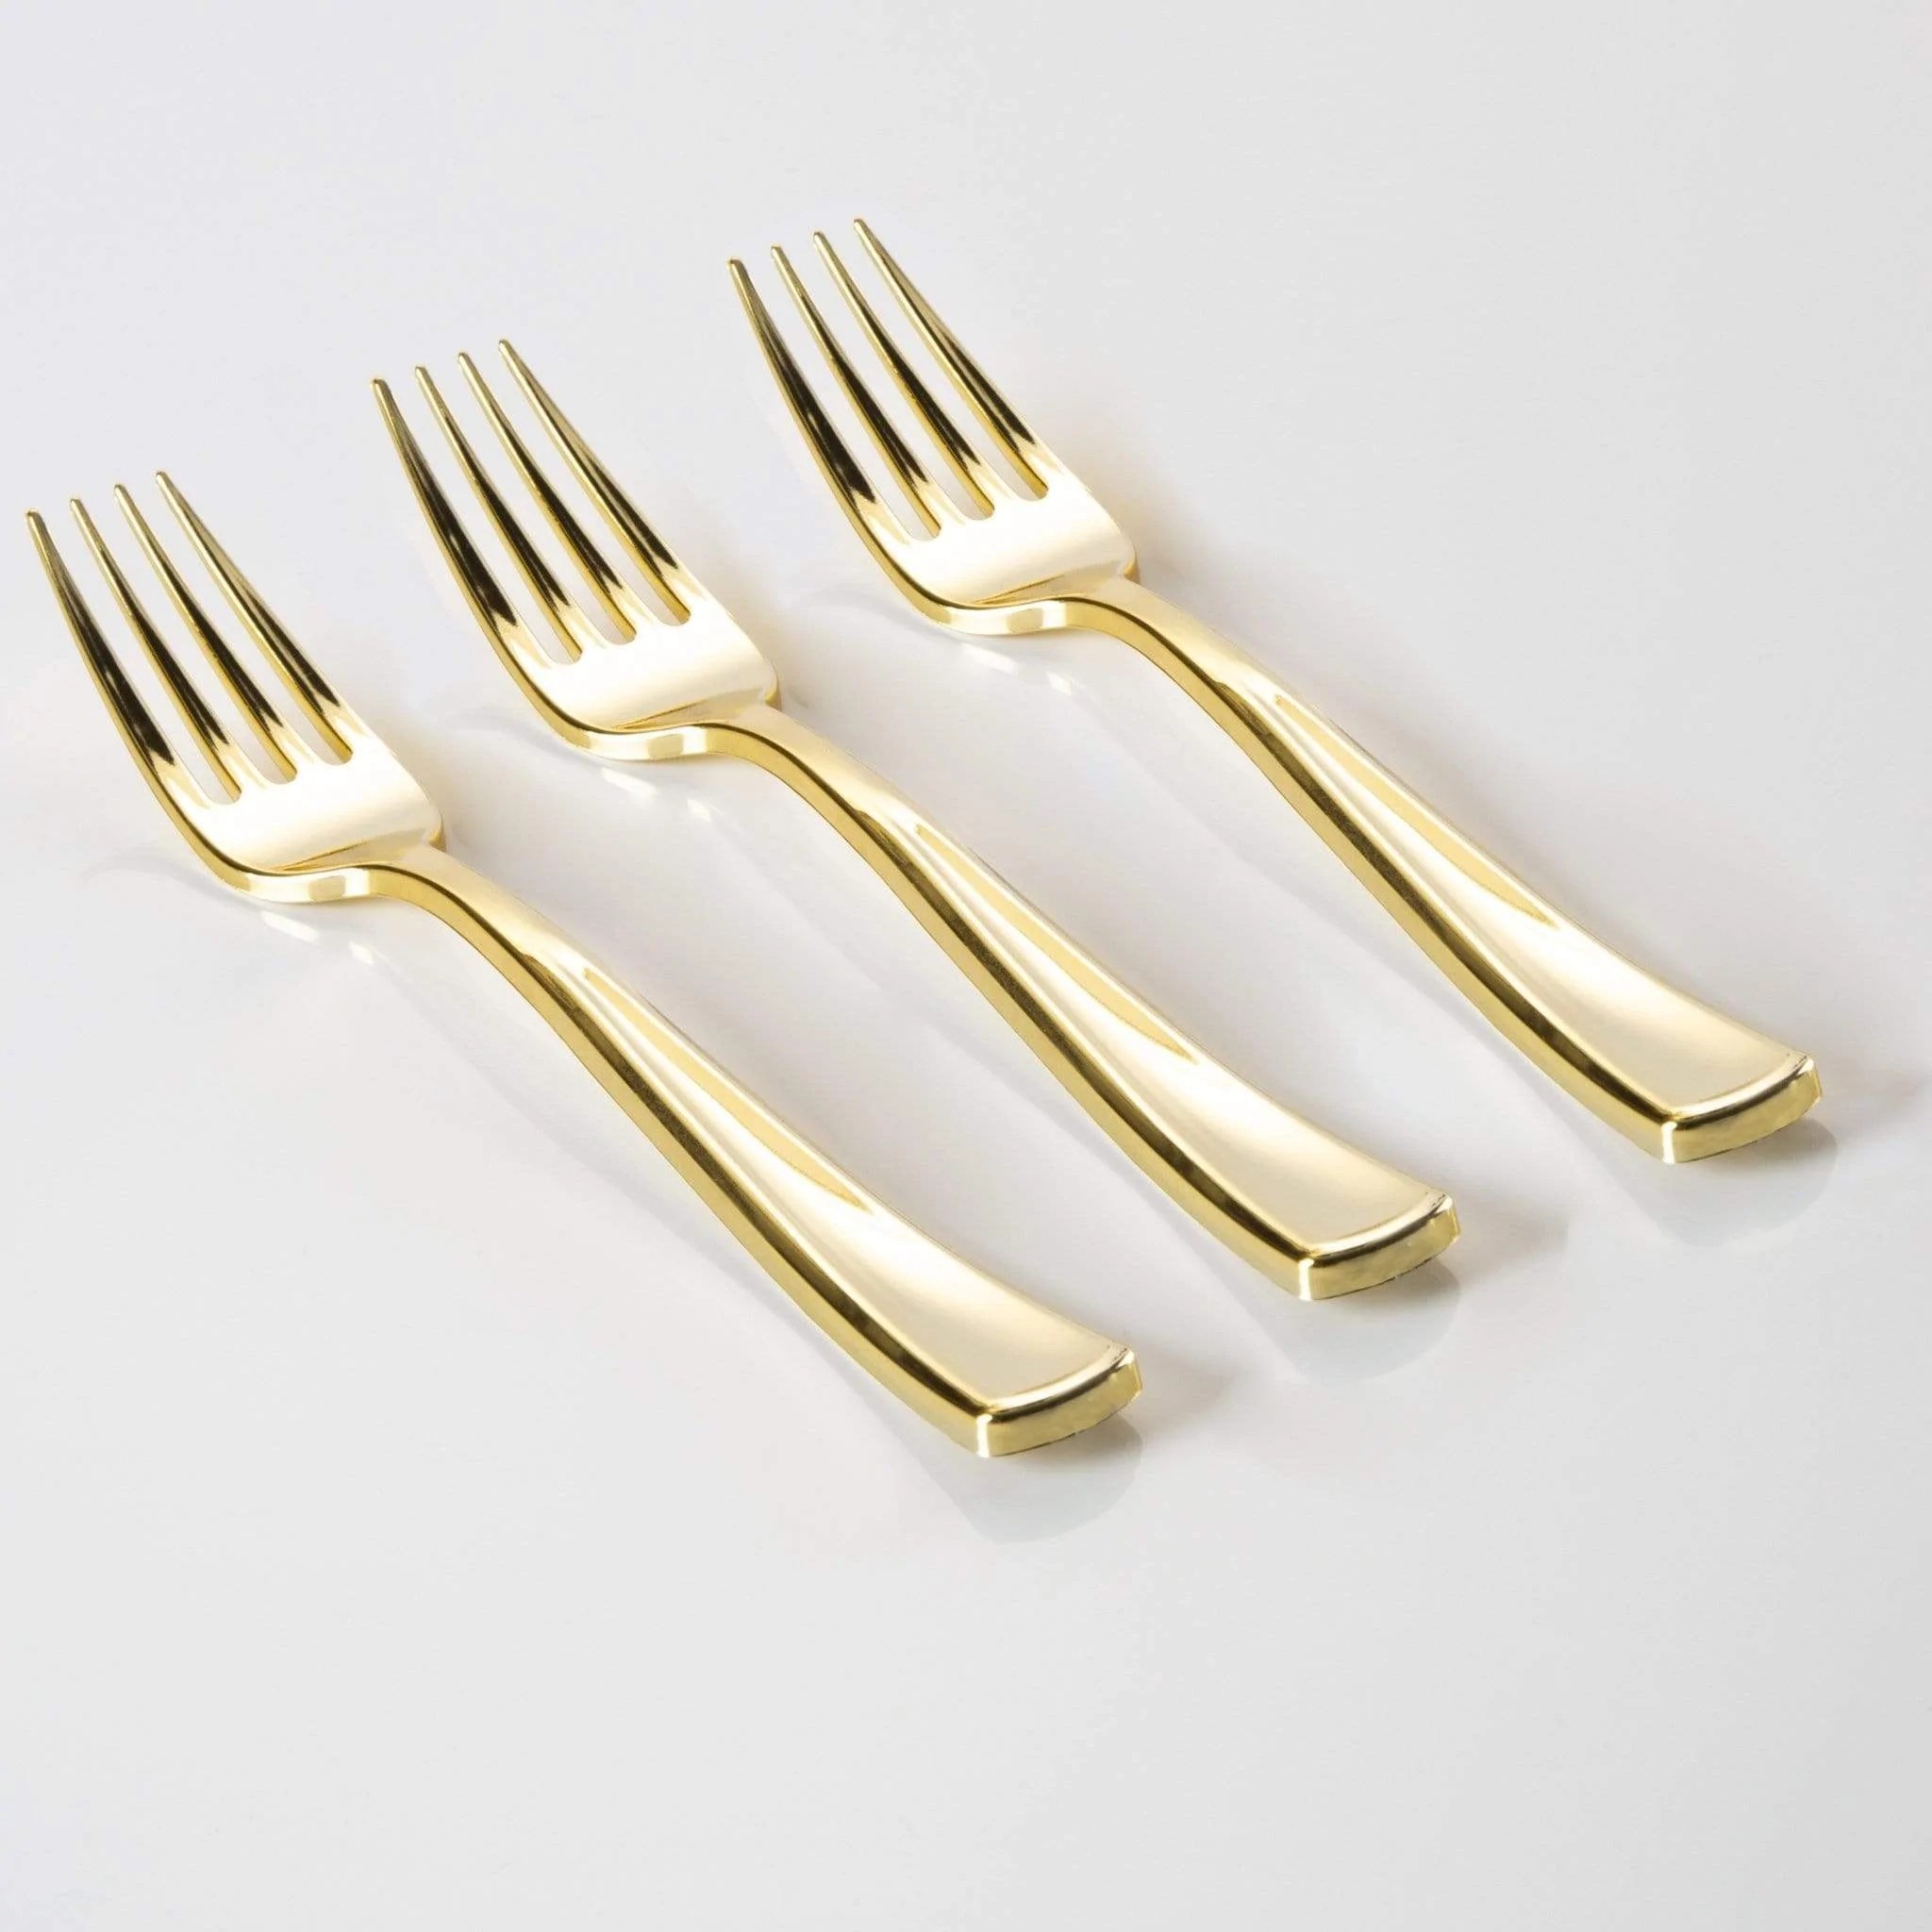 Luxe Party Classic Design Gold Plastic Forks - 20 pcs